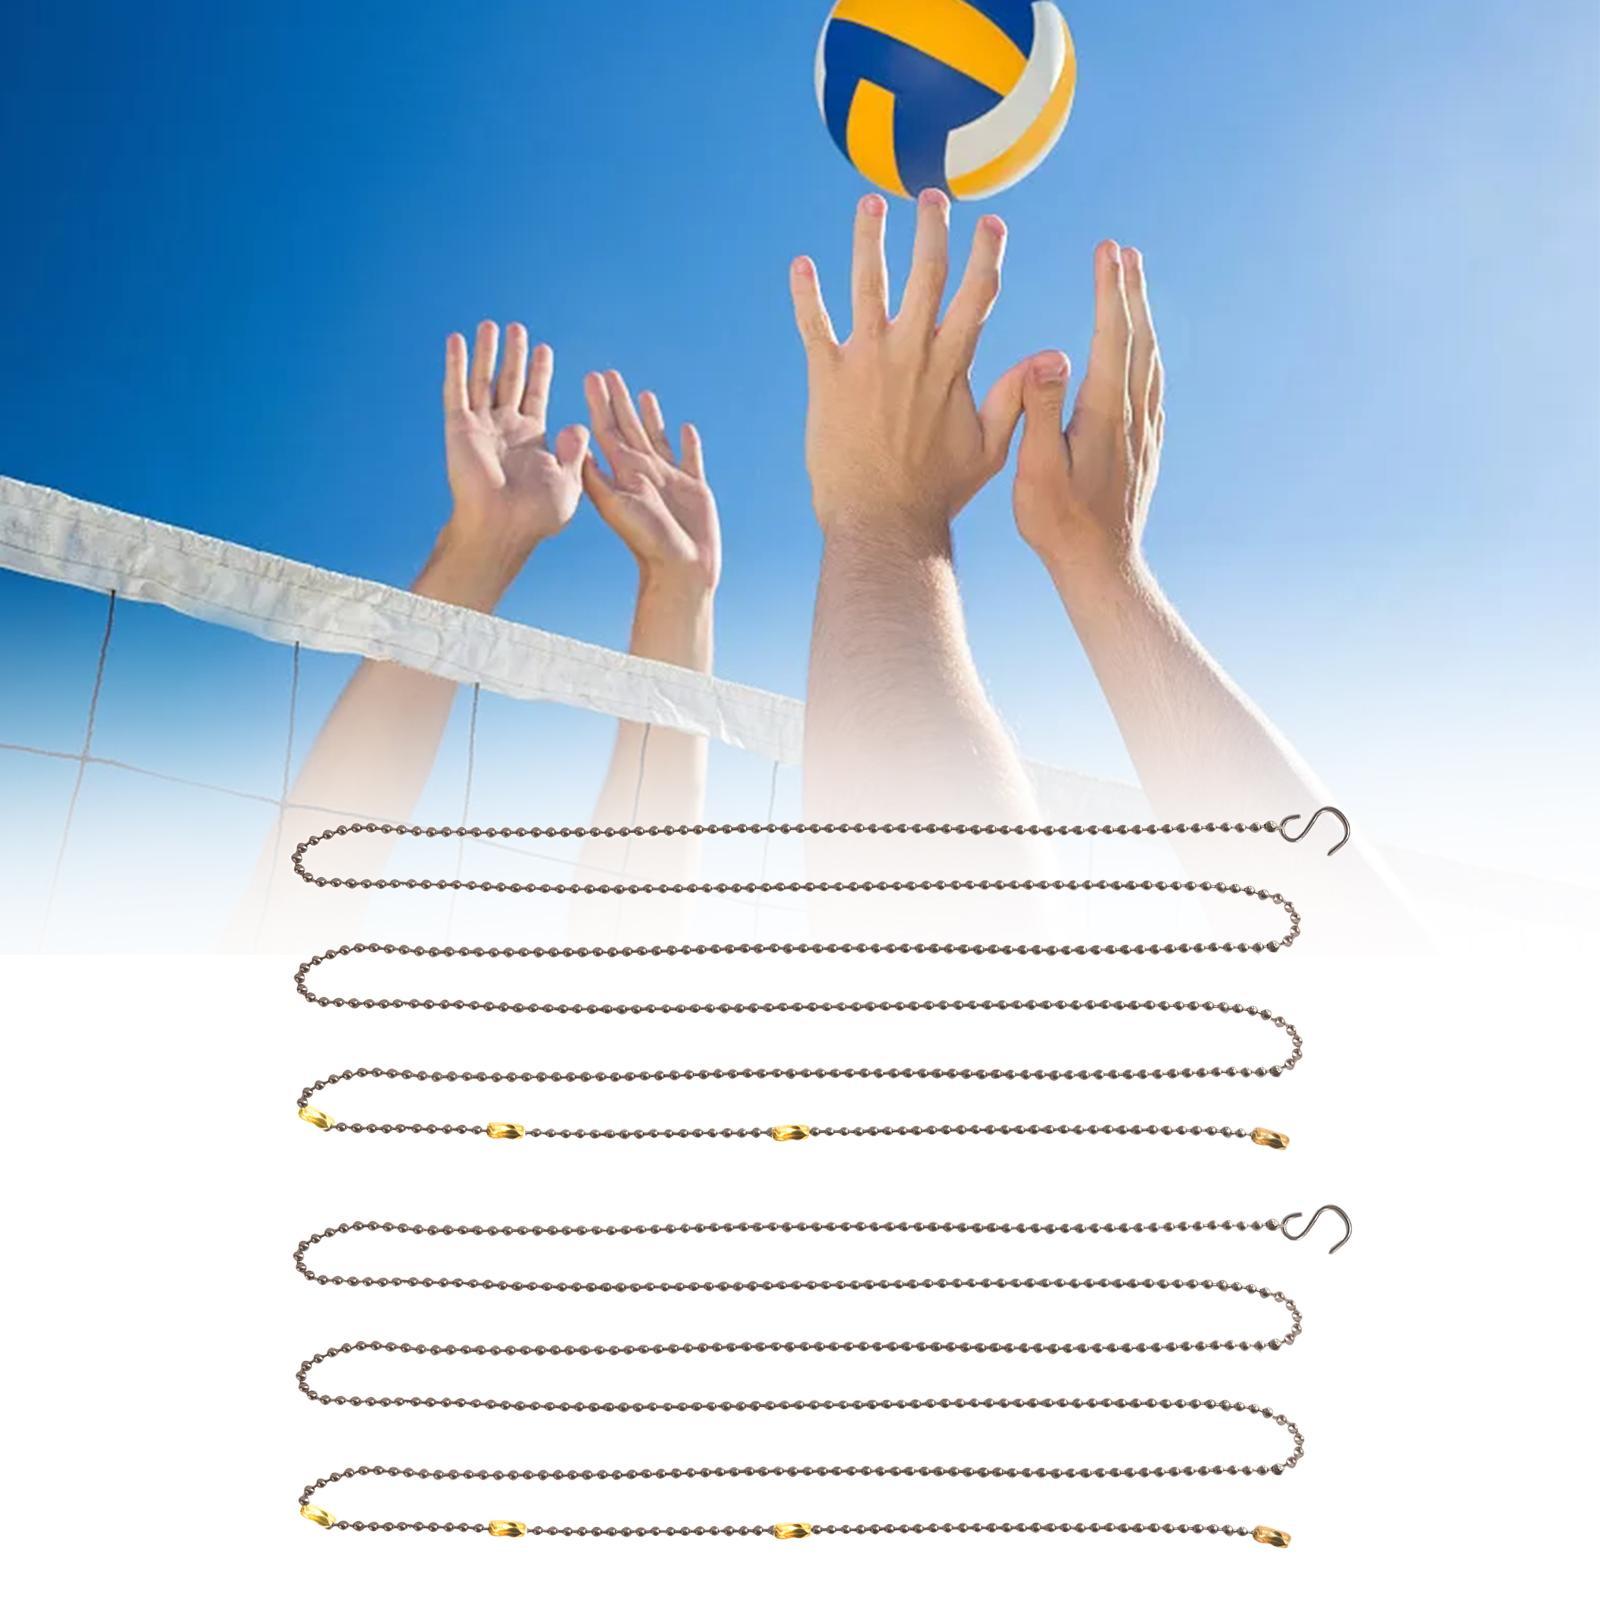 2.5M Length Volleyball Net Measure Chain for Outdoor Training Competitions